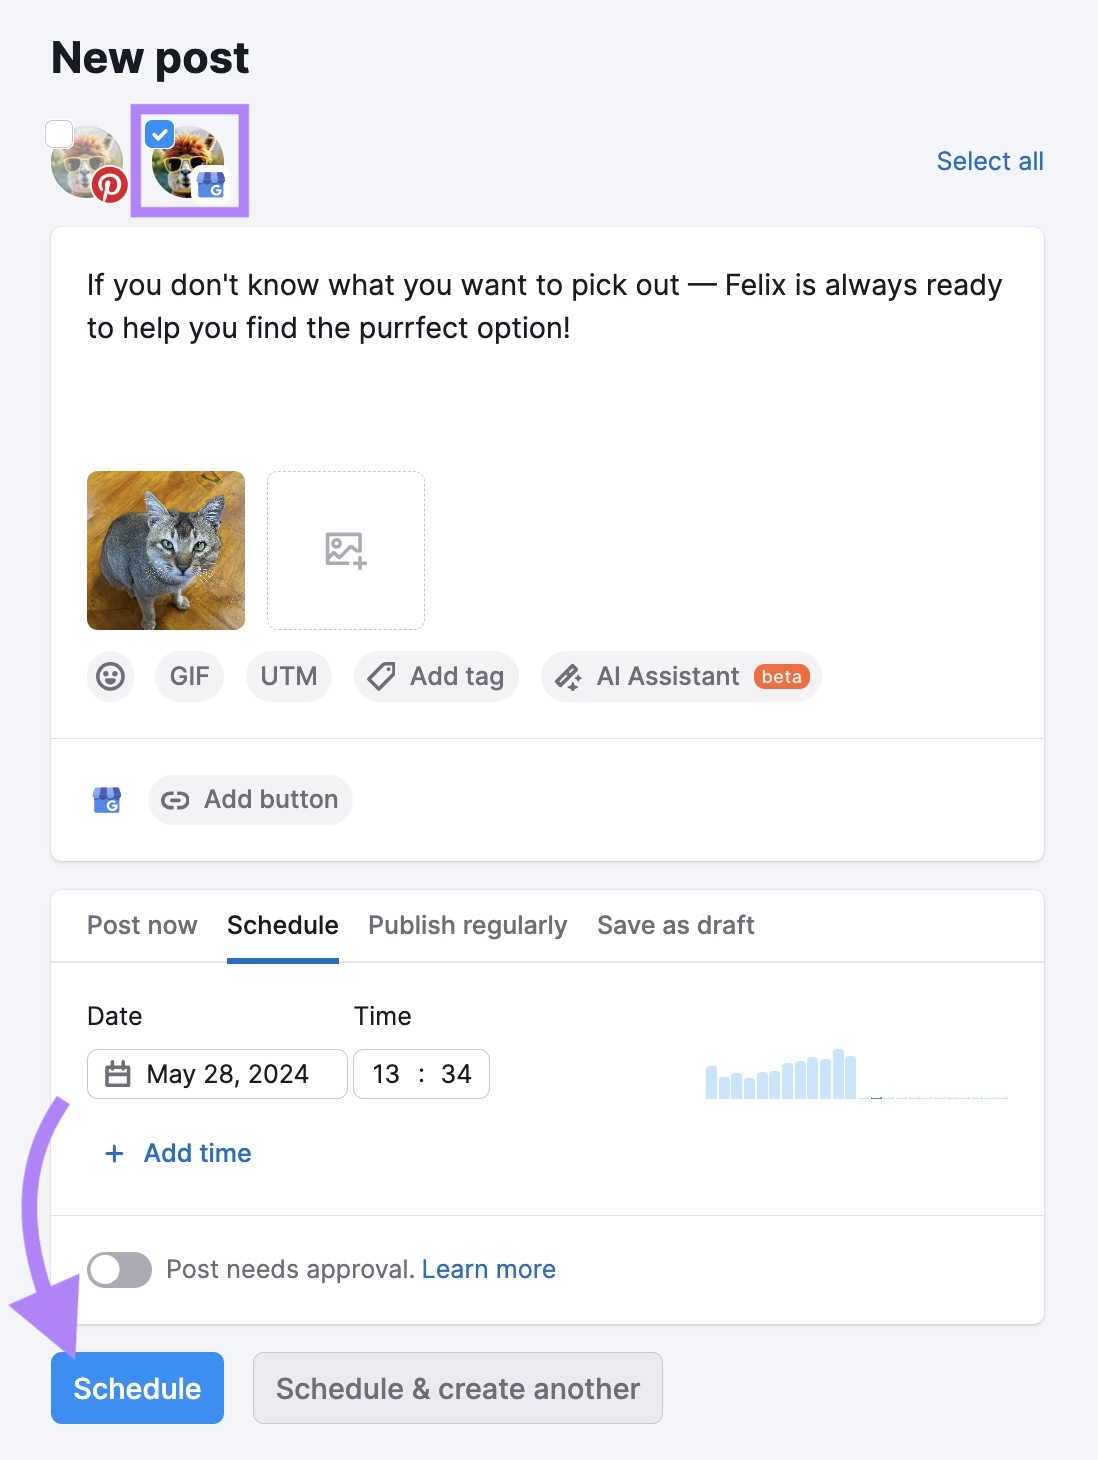 Semrush Social Poster interface for scheduling a new post.